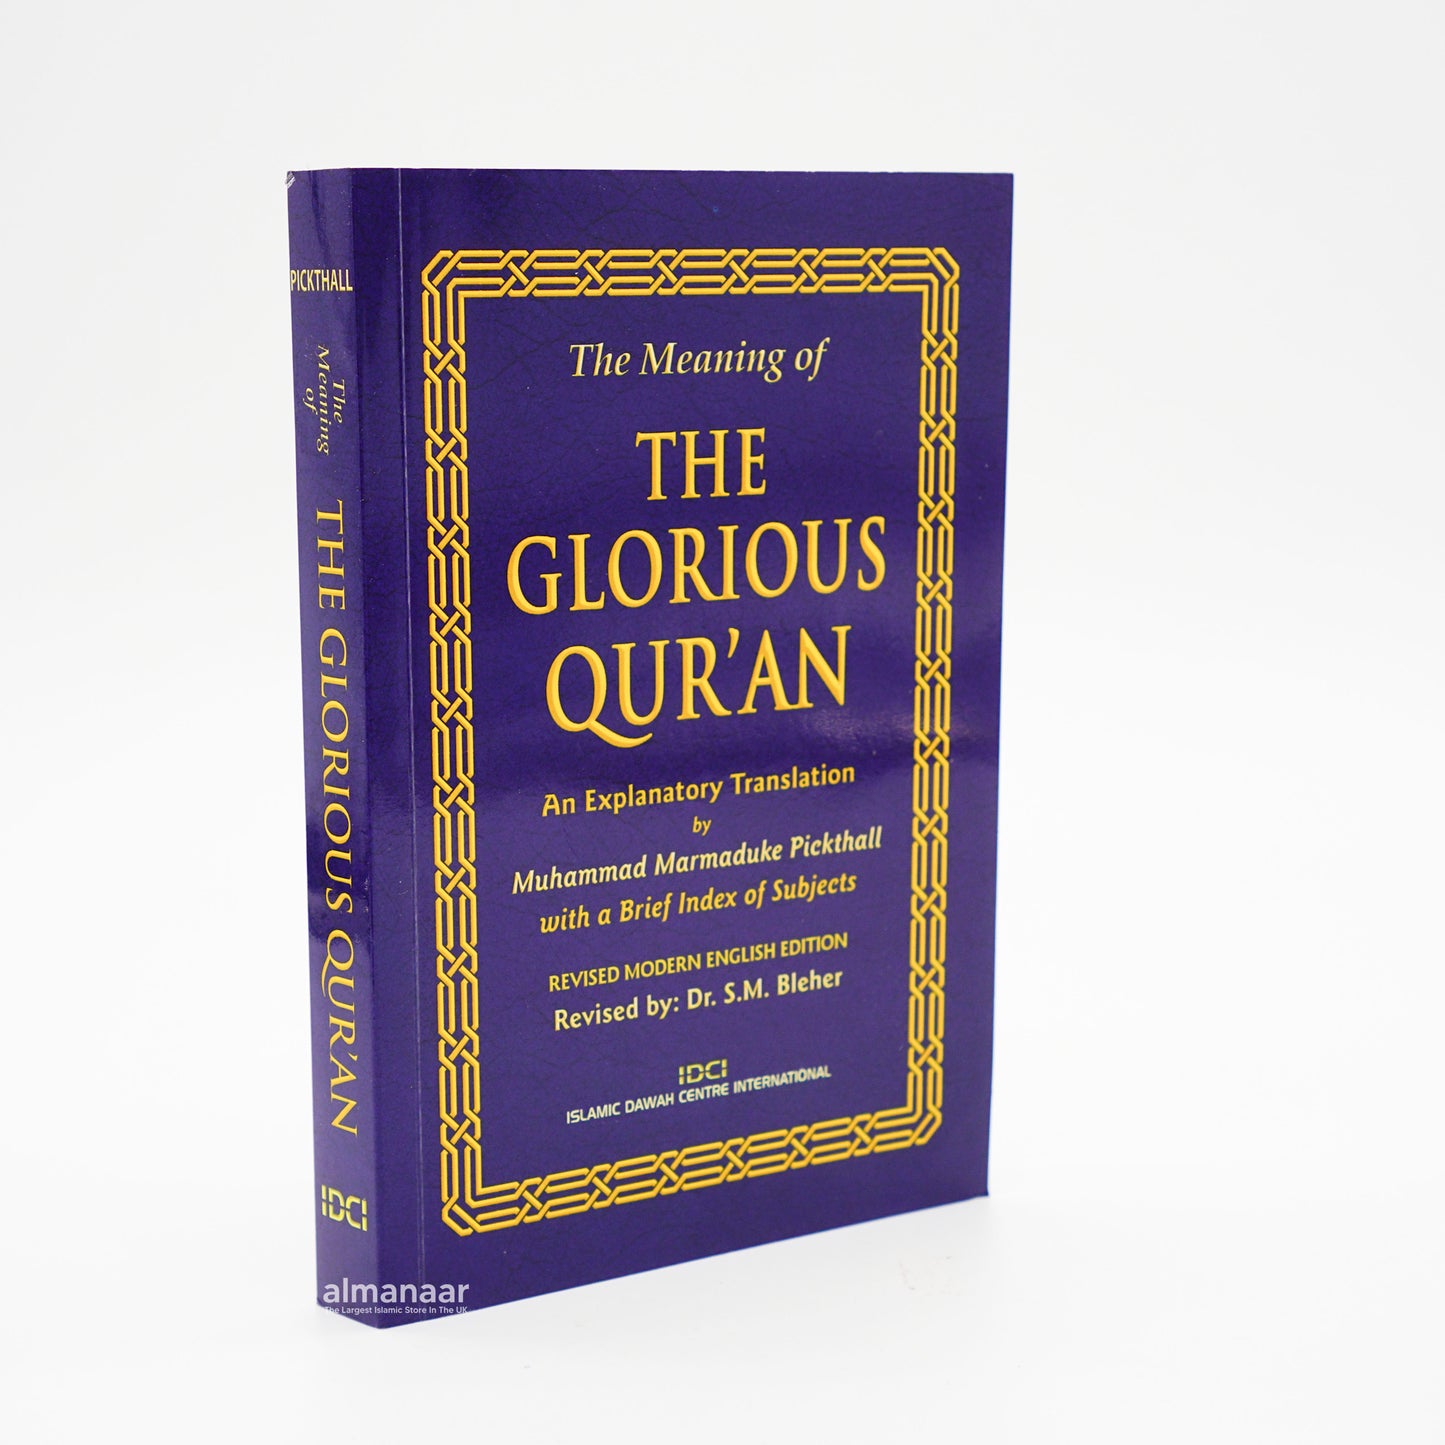 The Quran: The Meaning of the Glorious (Holy) Qur'an